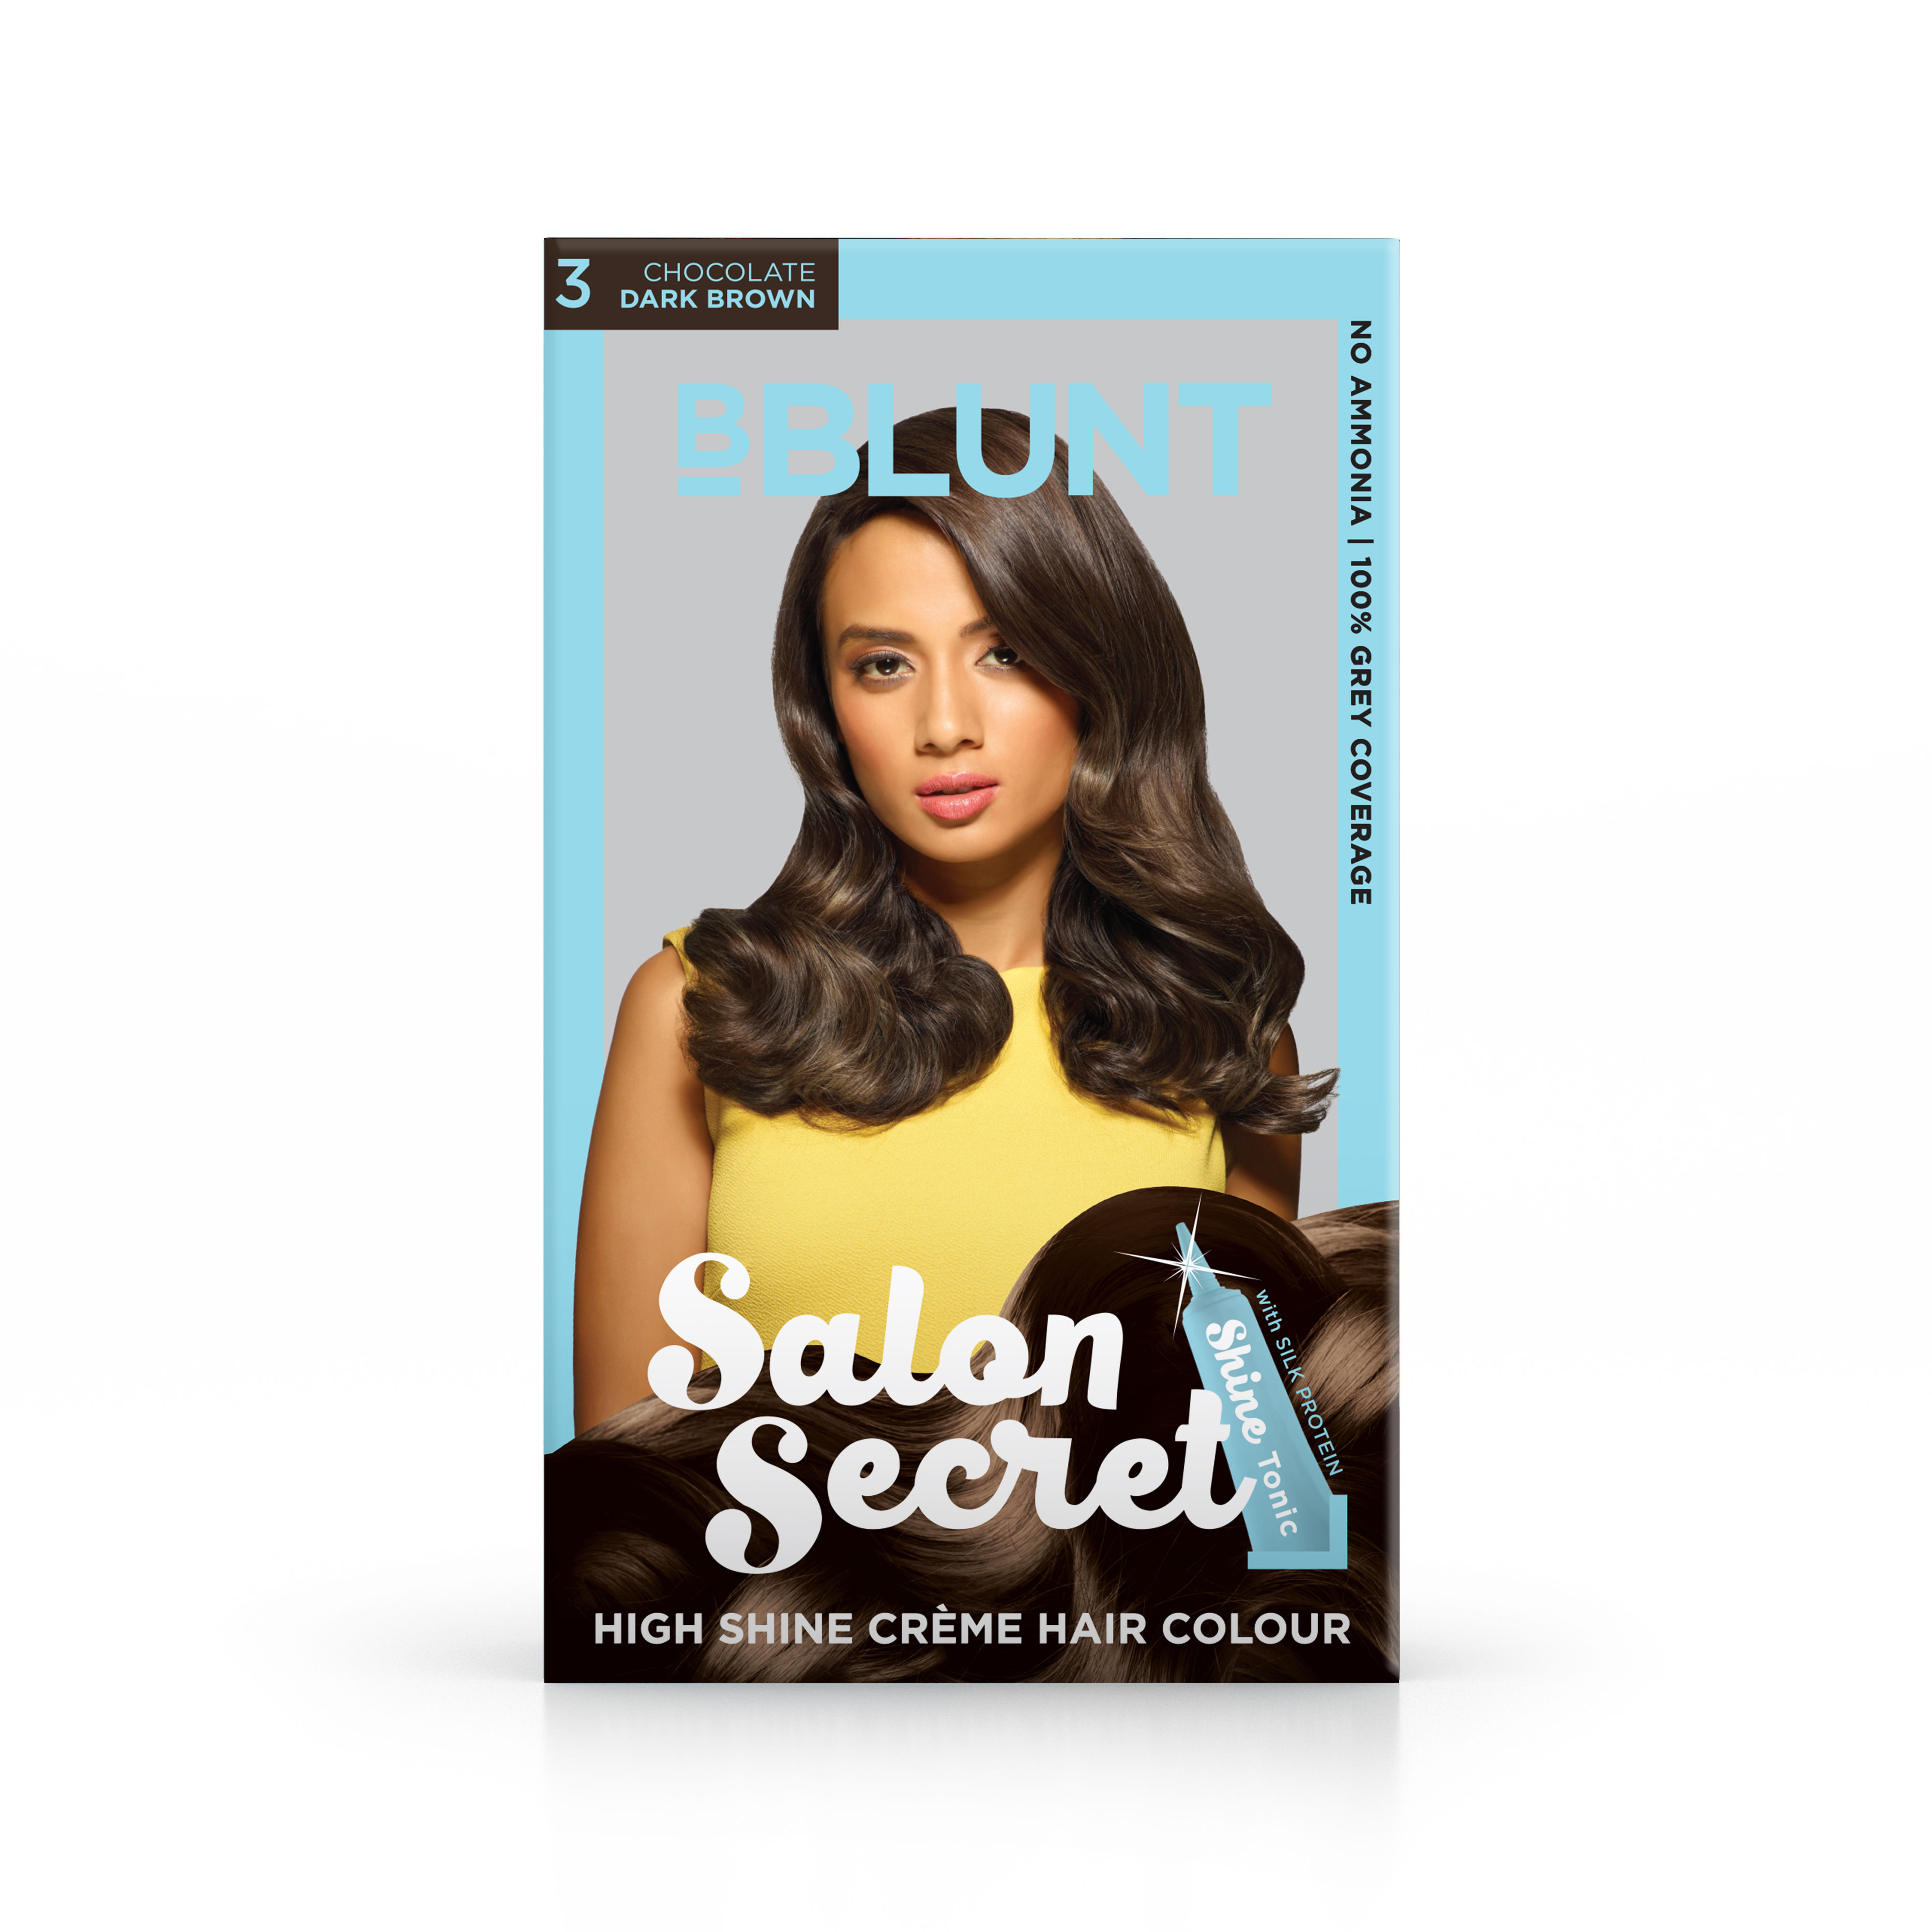 BBLUNT Salon Secret High Shine Creme Hair Colour: Buy BBLUNT Salon Secret  High Shine Creme Hair Colour Online at Best Price in India | Nykaa